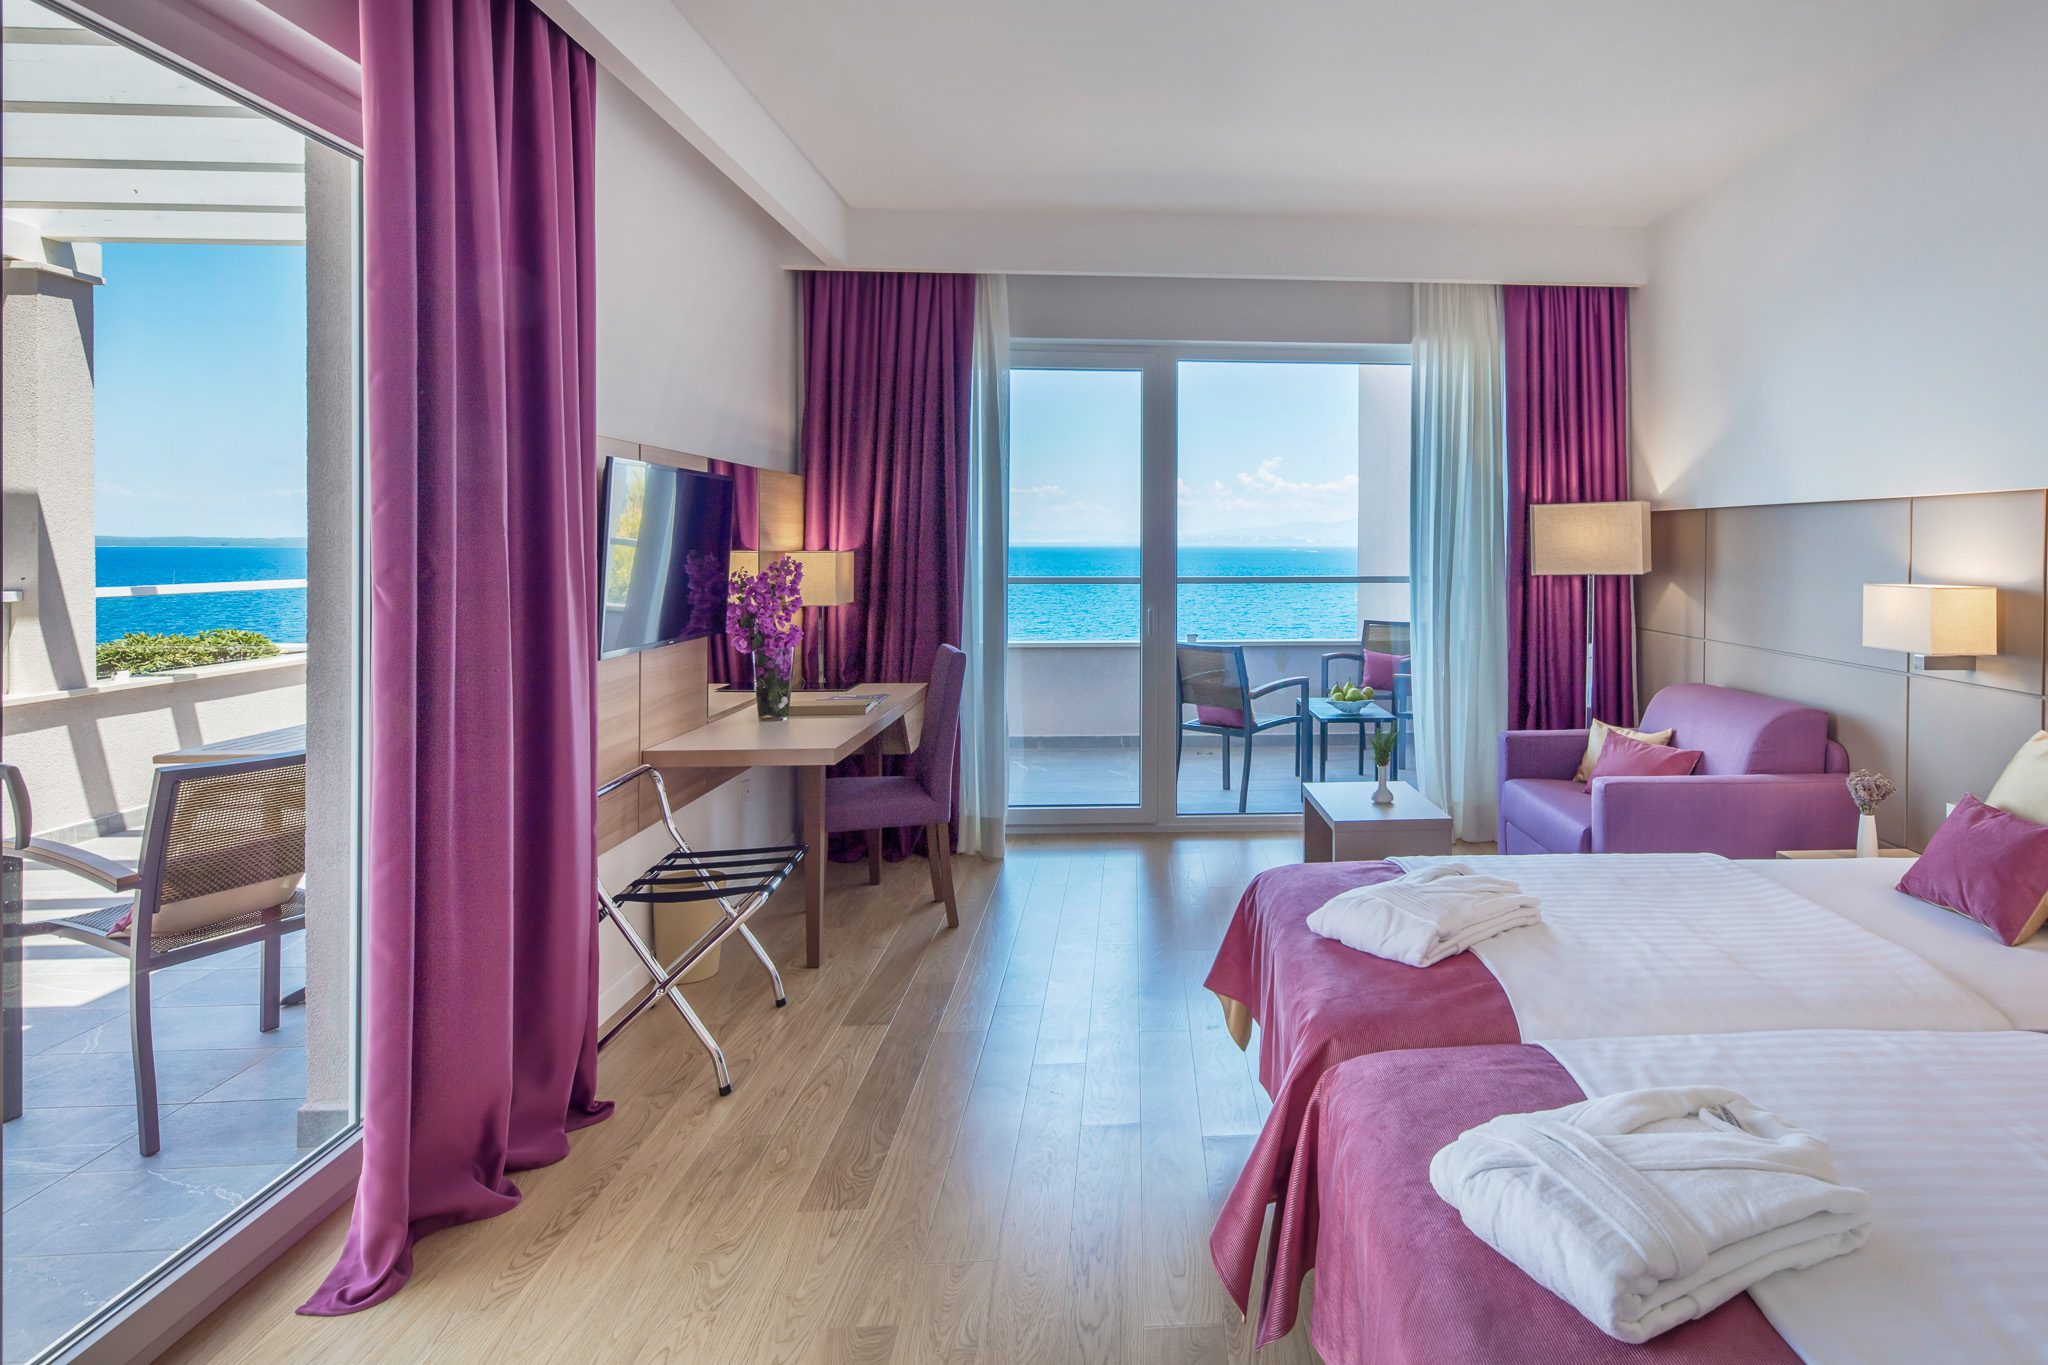 Room in a 4 star Vitality Hotel Punta with a beautiful view of Adriatic sea